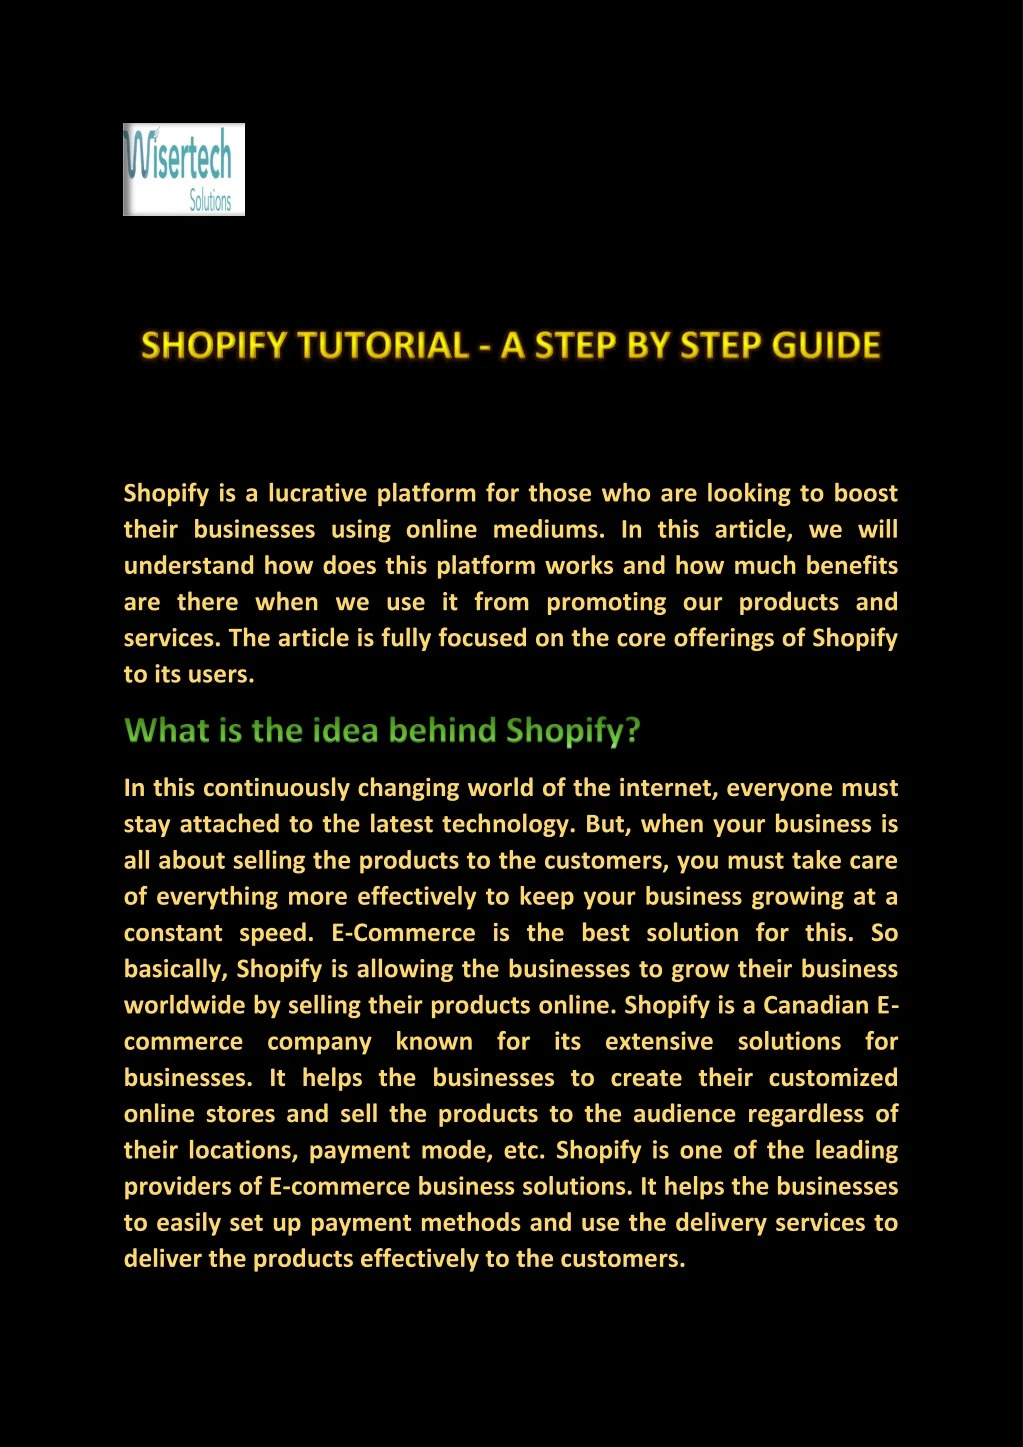 shopify is a lucrative platform for those